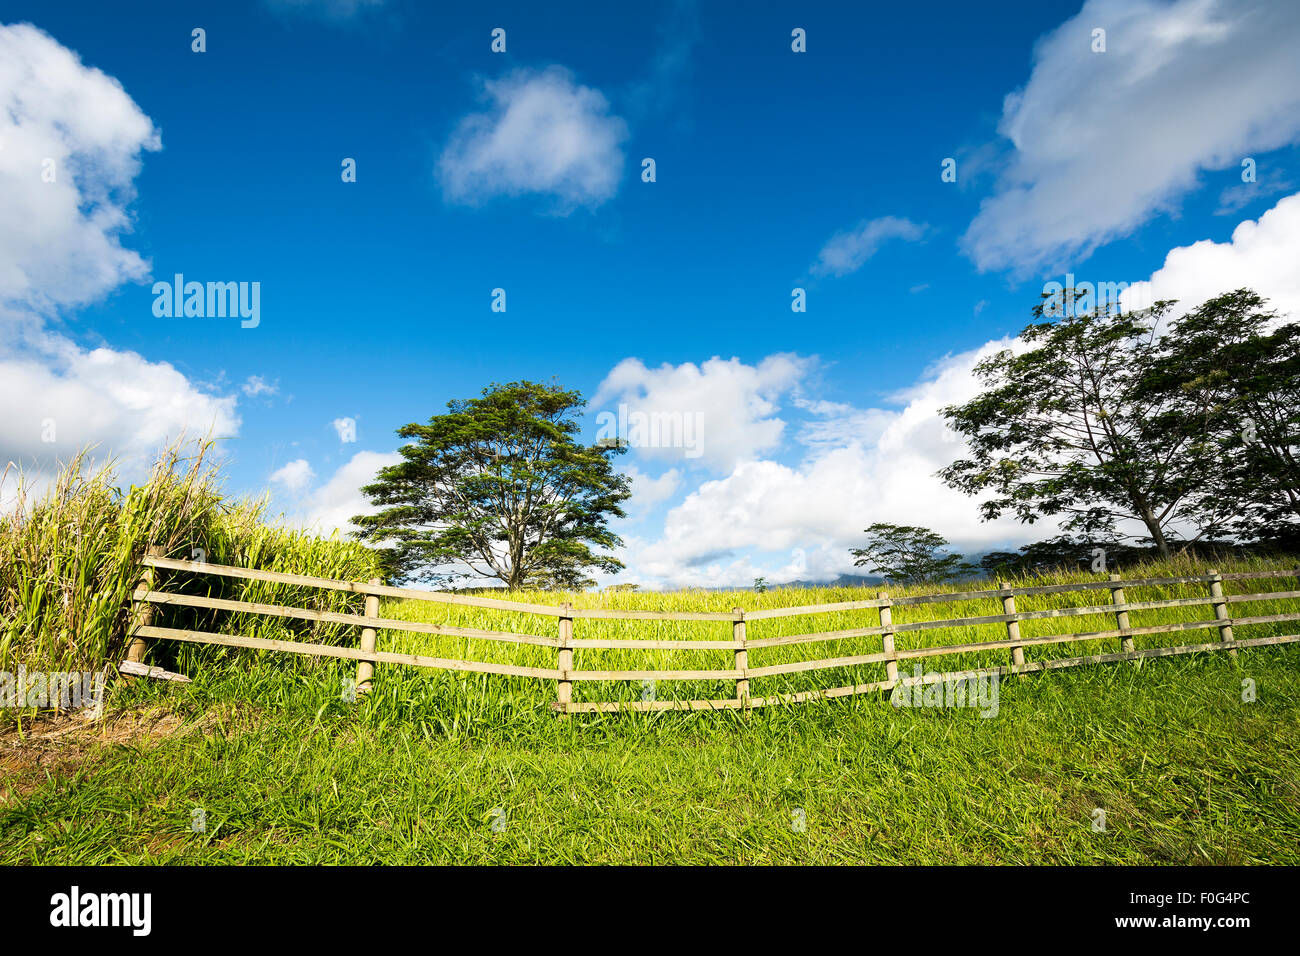 A vibrant, green meadow behind a ranching fence shows the lush growth in a rural farming community on Kauai Hawaii. Stock Photo